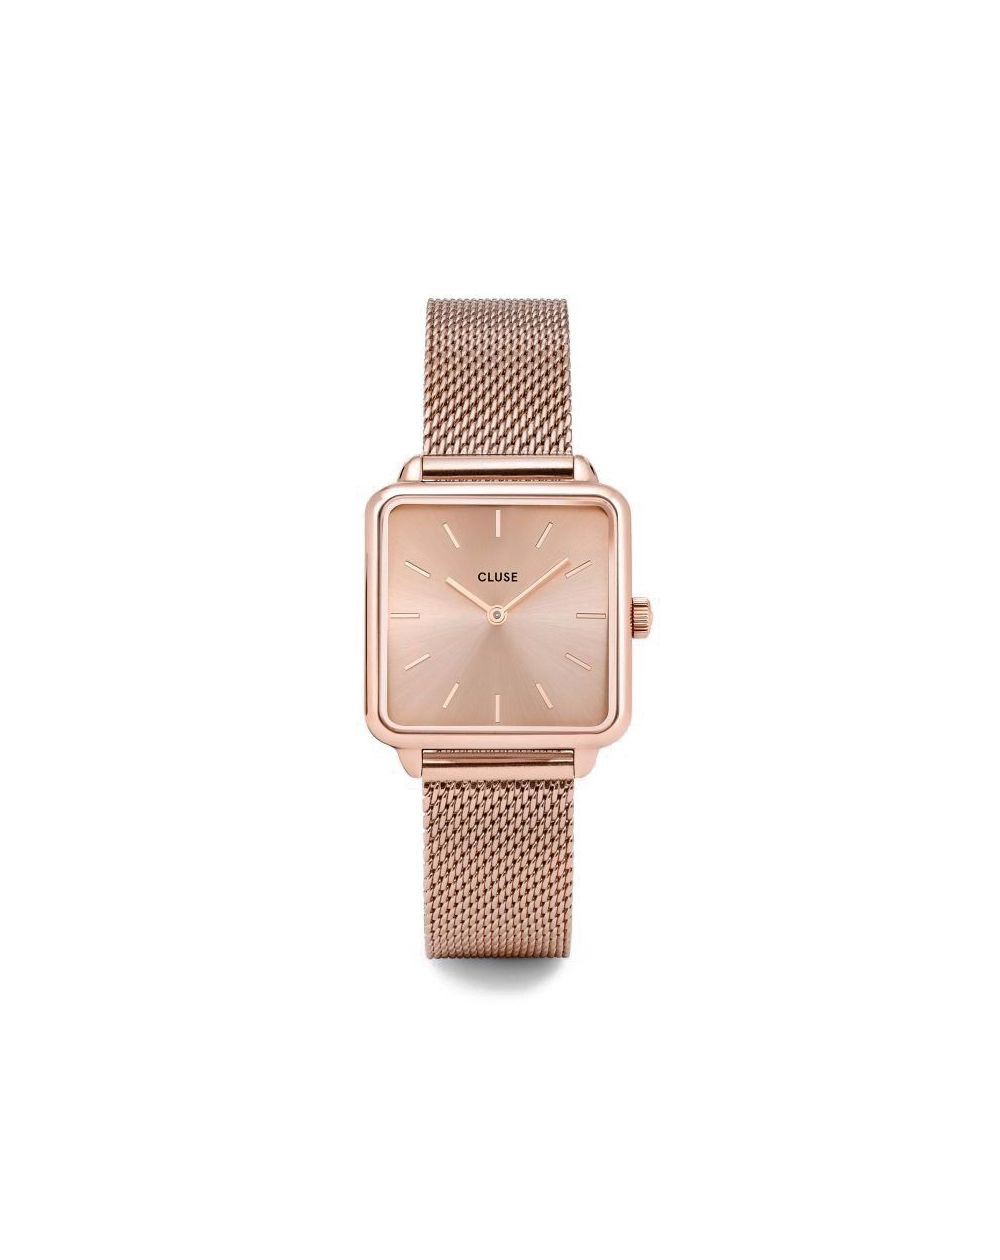 Cluse - Watch CLUSE - The Tetragon full mesh pink gold